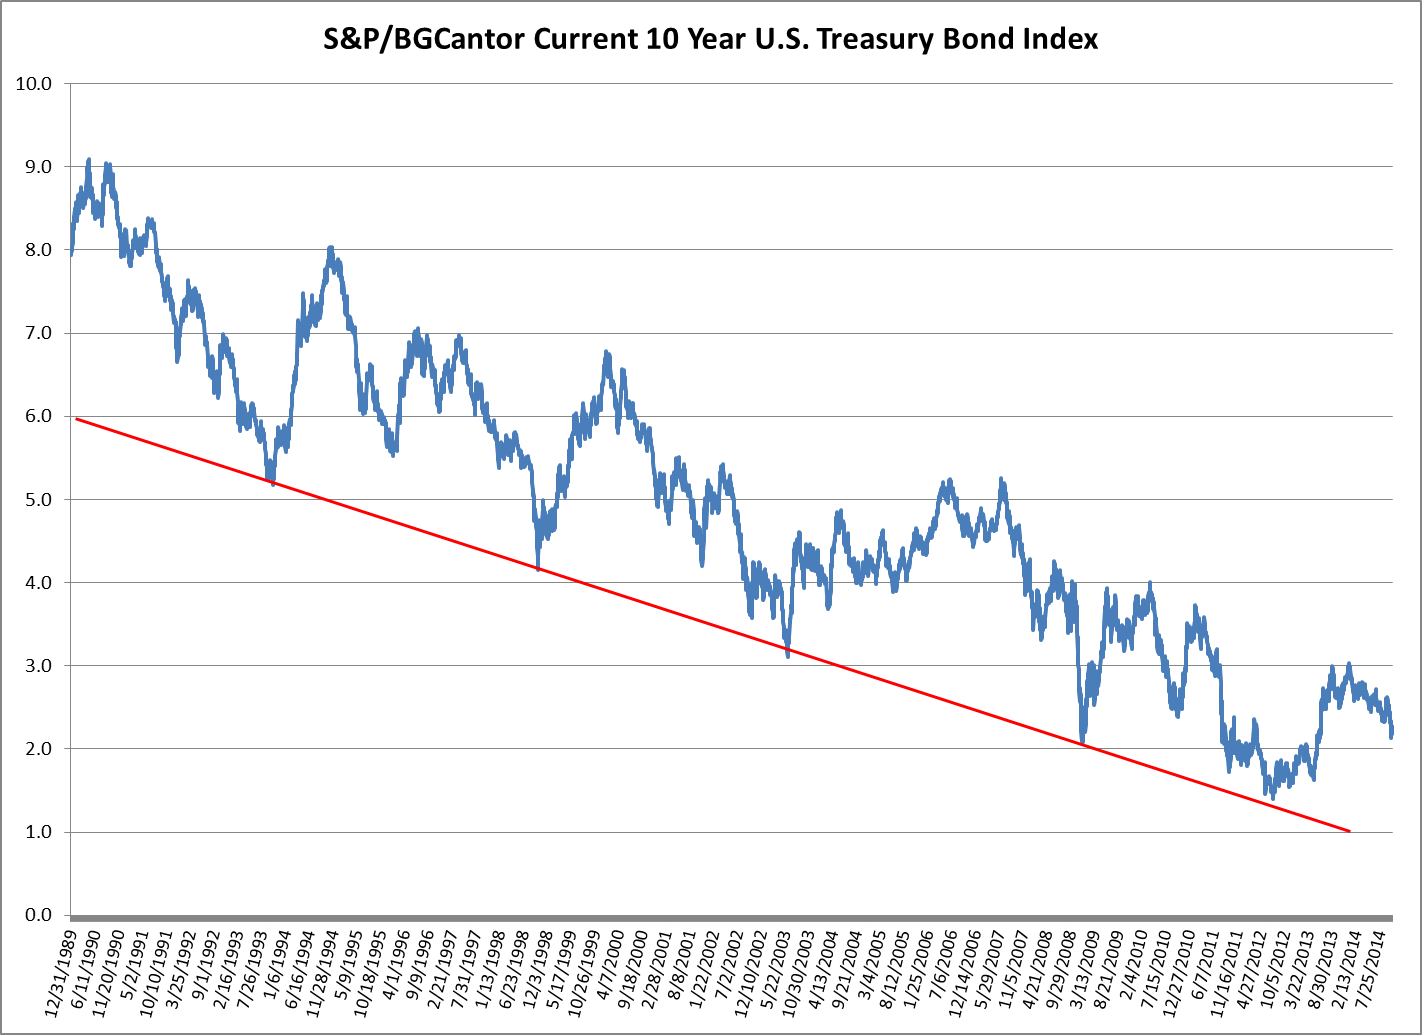 Yield-to-Worst History of the S&P-BGCantor Current 10 Year U.S. Treasury Bond Index